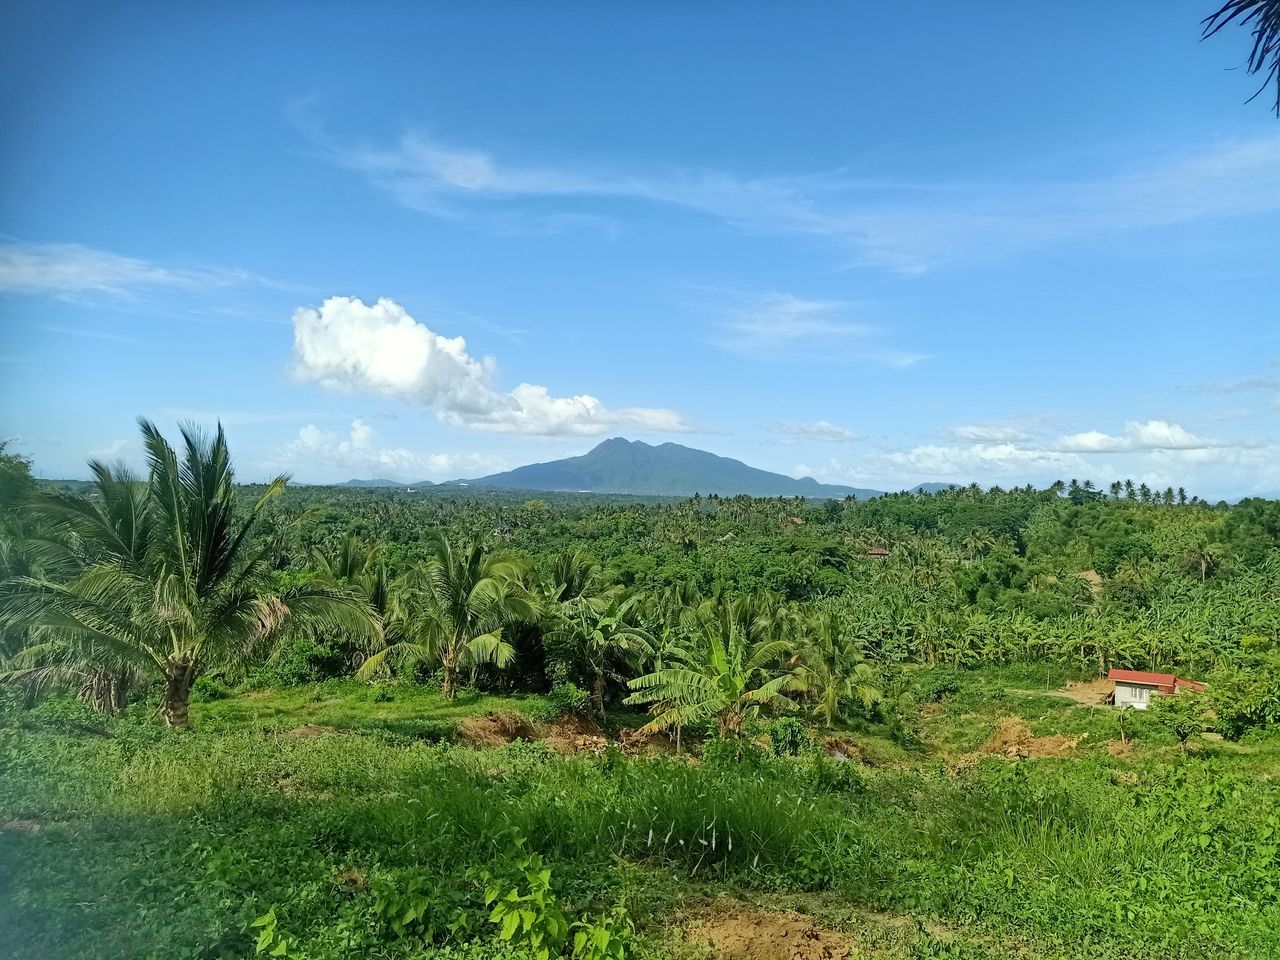 plant, sky, landscape, environment, nature, land, scenics - nature, tree, natural environment, mountain, cloud, beauty in nature, grass, field, green, growth, no people, rural area, tranquility, tropical climate, agriculture, day, blue, tranquil scene, outdoors, meadow, vegetation, forest, rural scene, palm tree, food and drink, crop, plantation, non-urban scene, horizon, food, flower, grassland, mountain range, travel destinations